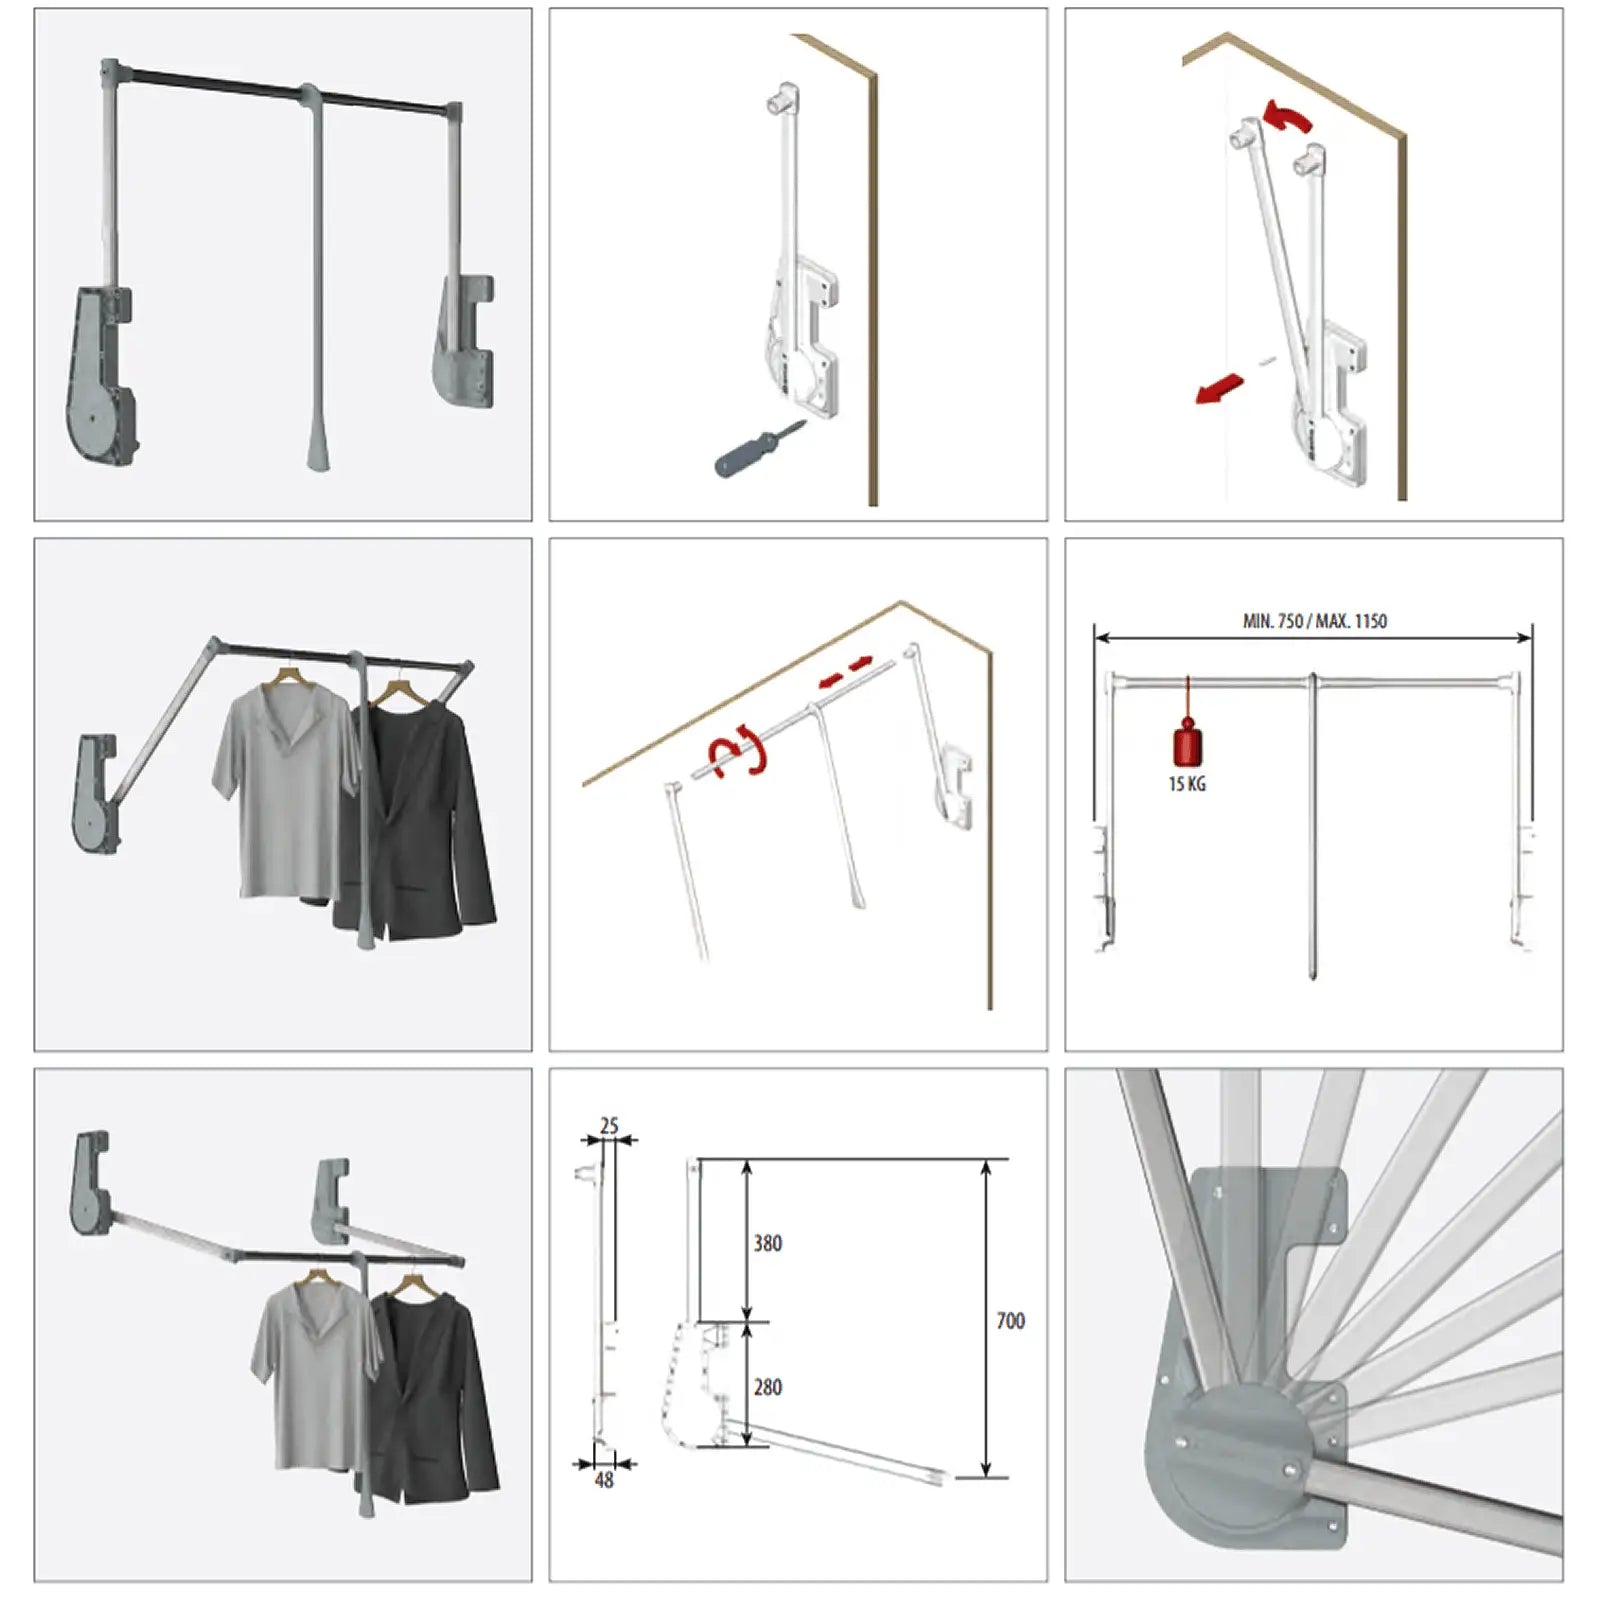 15KG Soft Close Lift / Pull Down Wardrobe Clothes Hanging Rail 750mm-1150mm - Decor And Decor